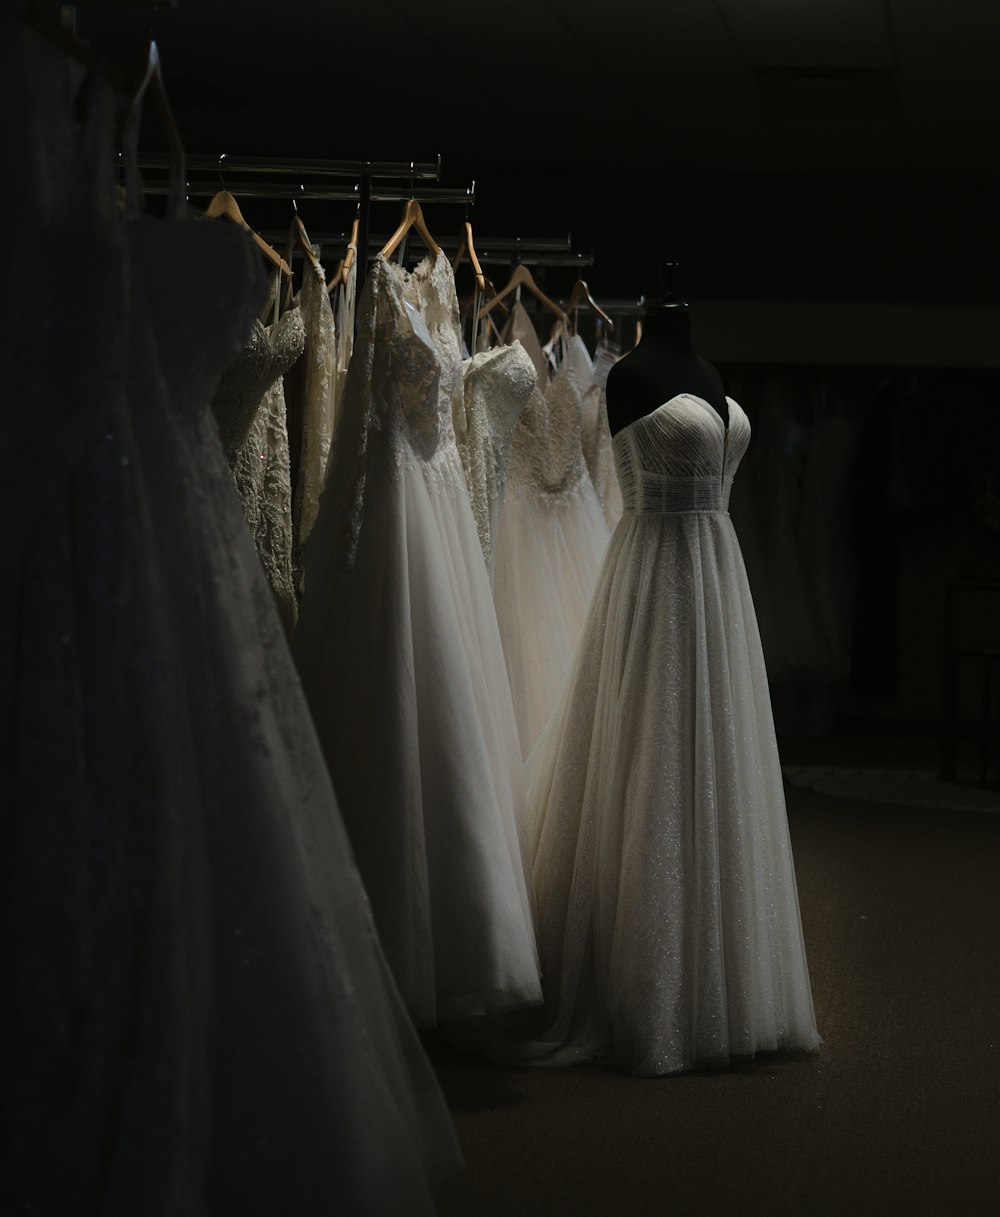 a row of wedding dresses hanging on a rack